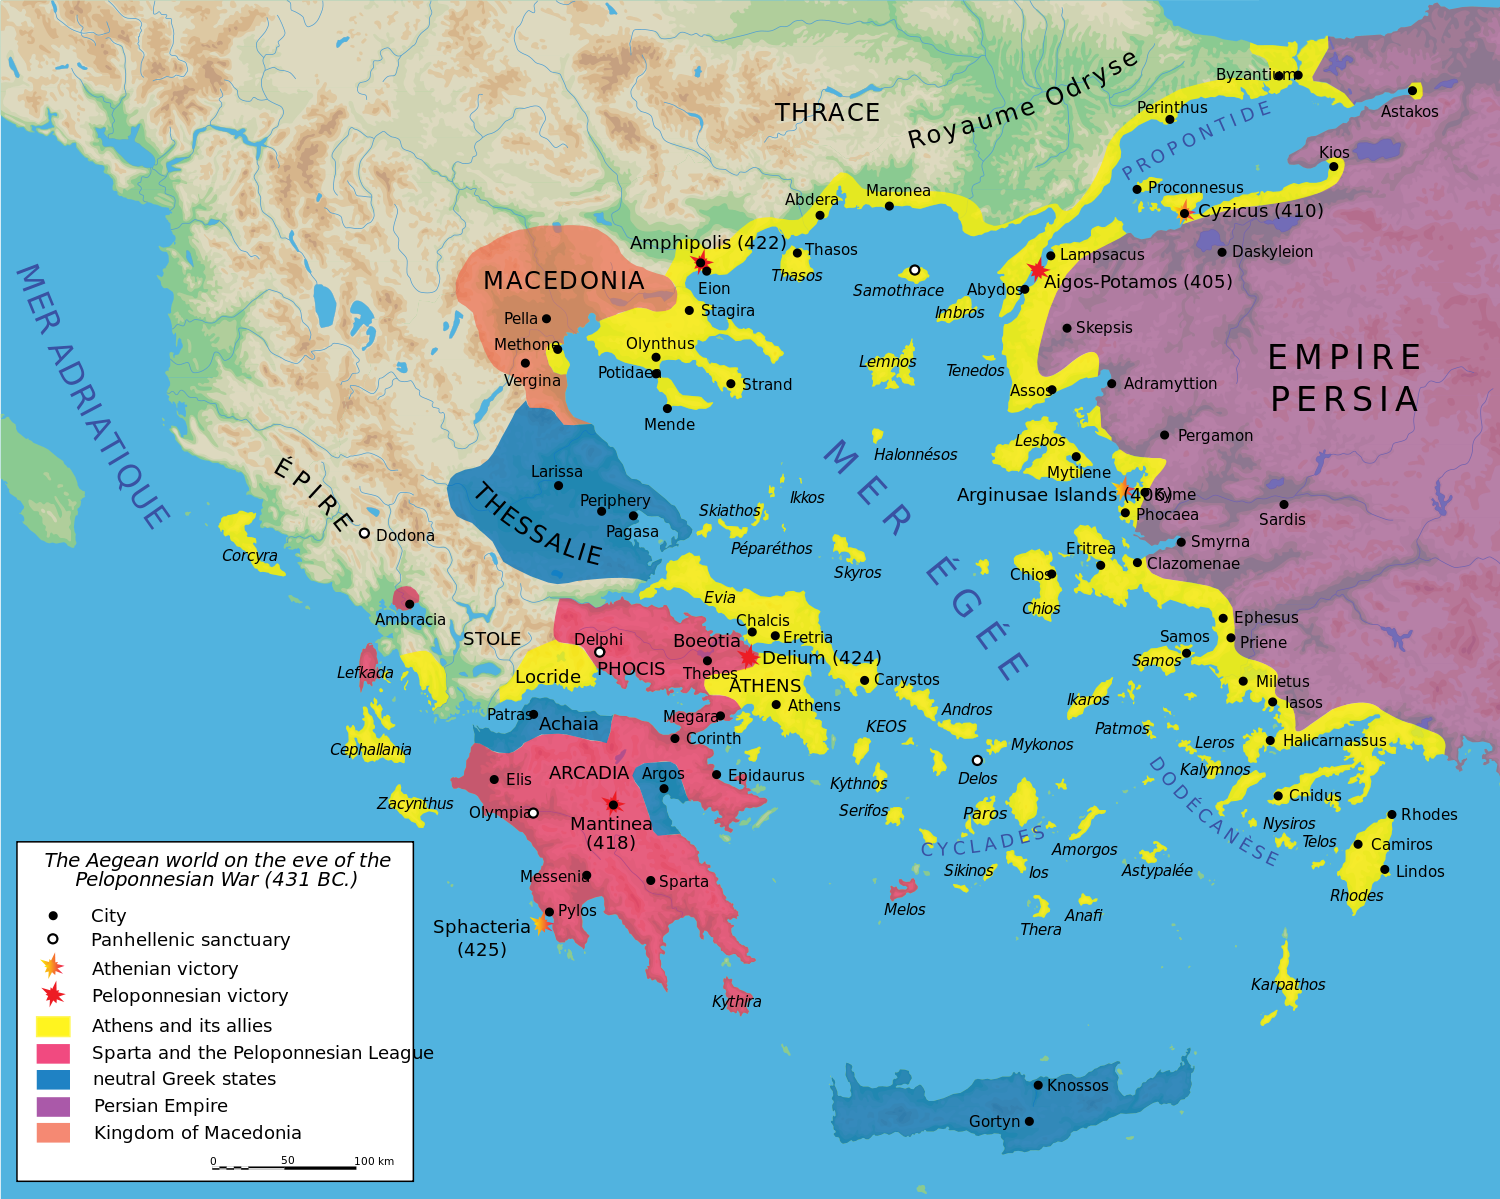 What events led to the Peloponnesian War? Socratic